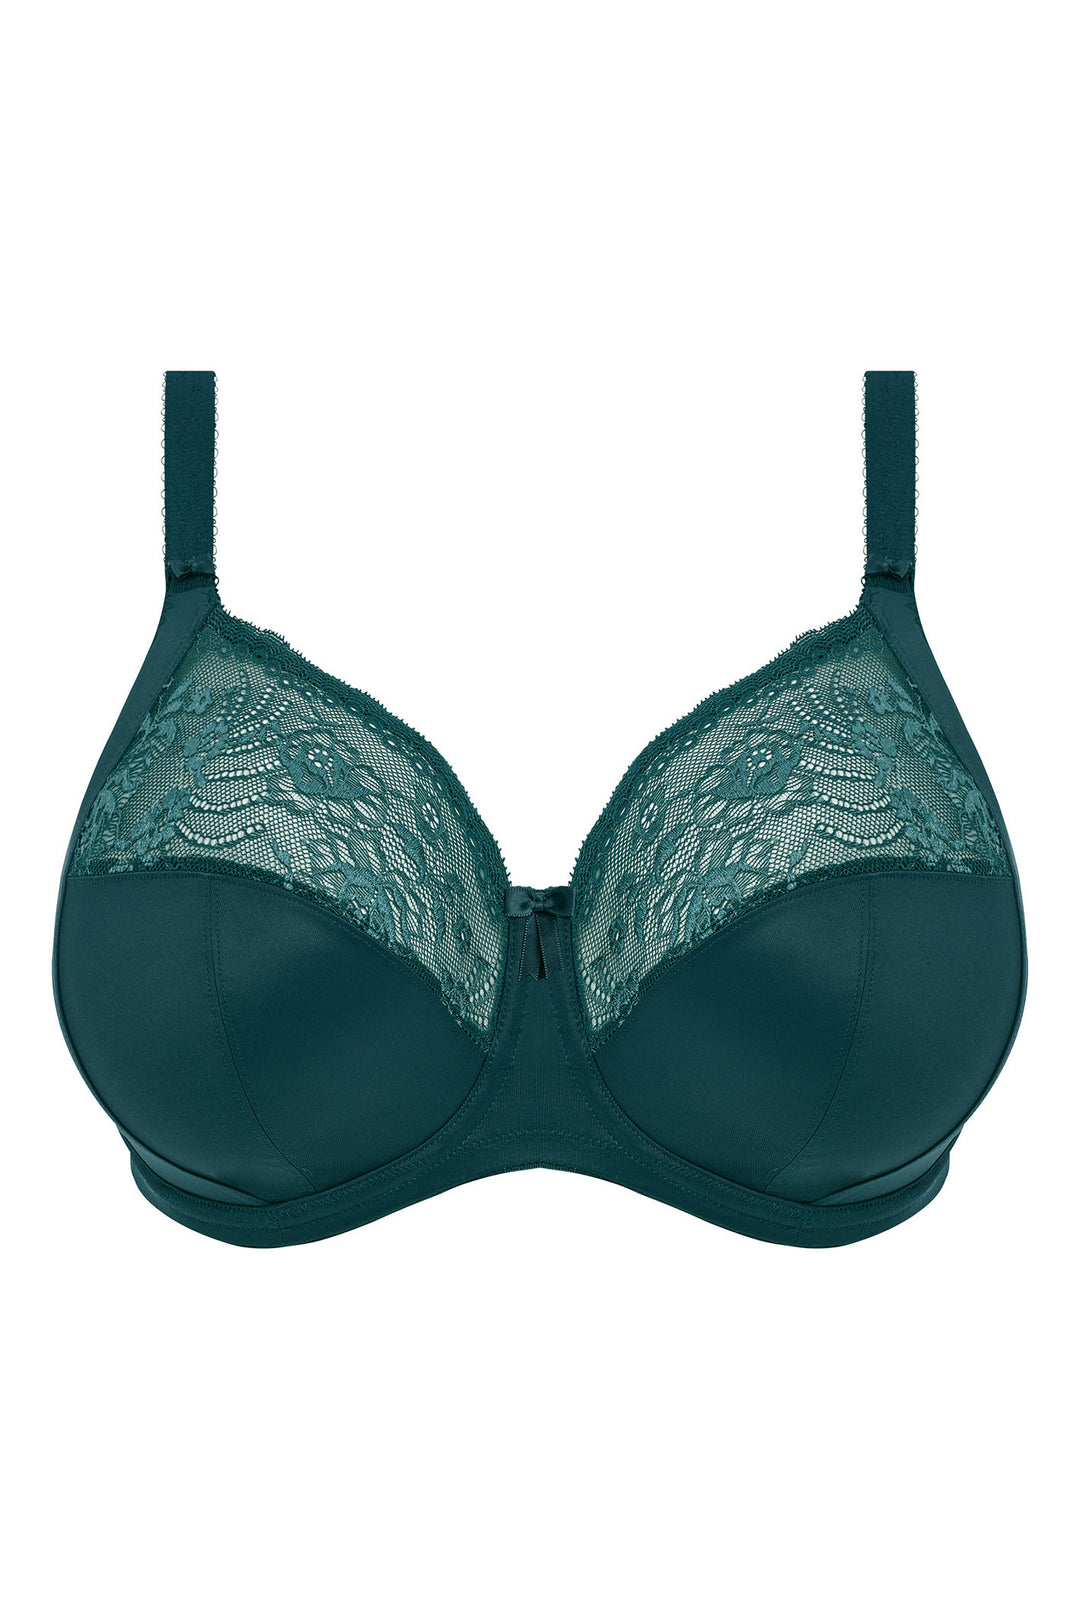 Elomi Morgan Stretch Lace Banded Underwire Bra (4111),38GG,Deep Teal